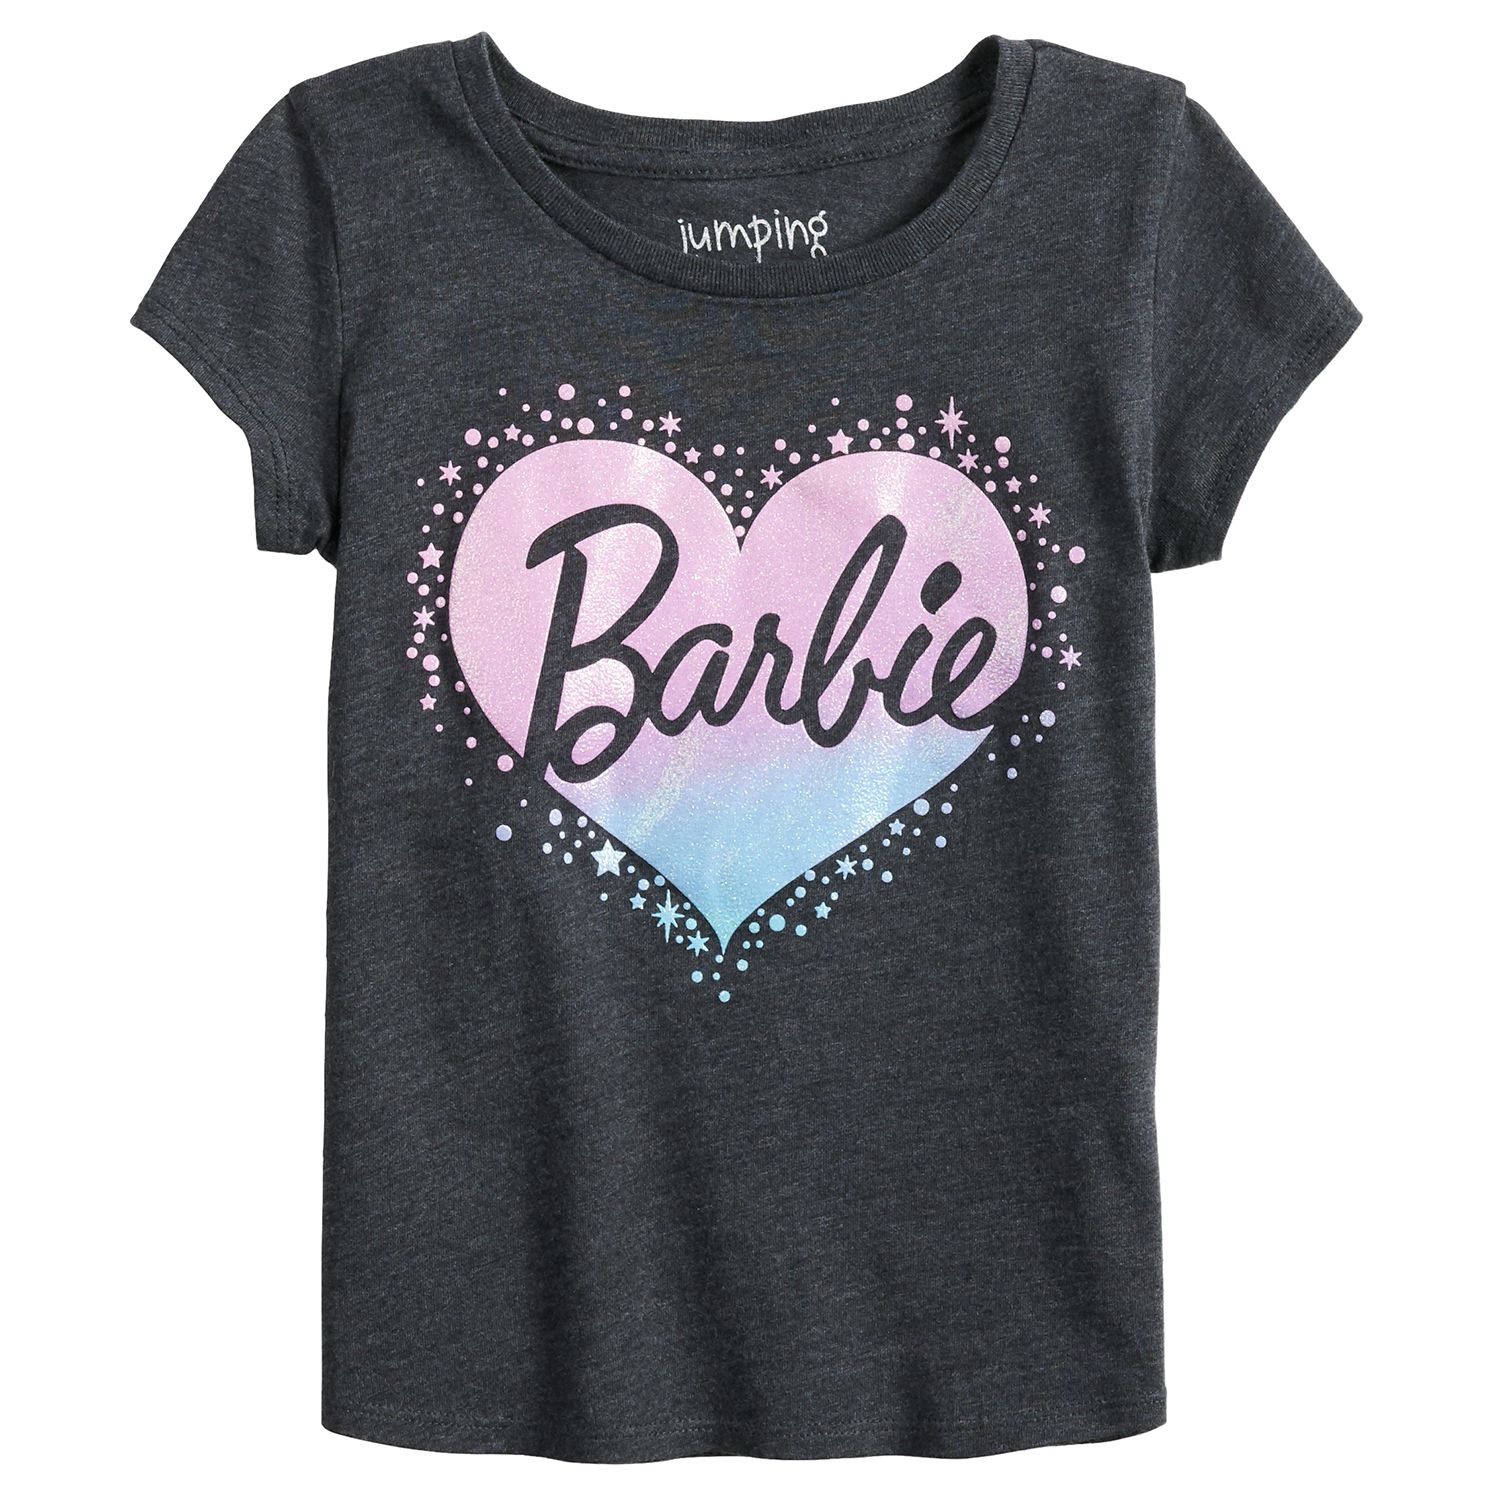 barbie clothing for toddlers